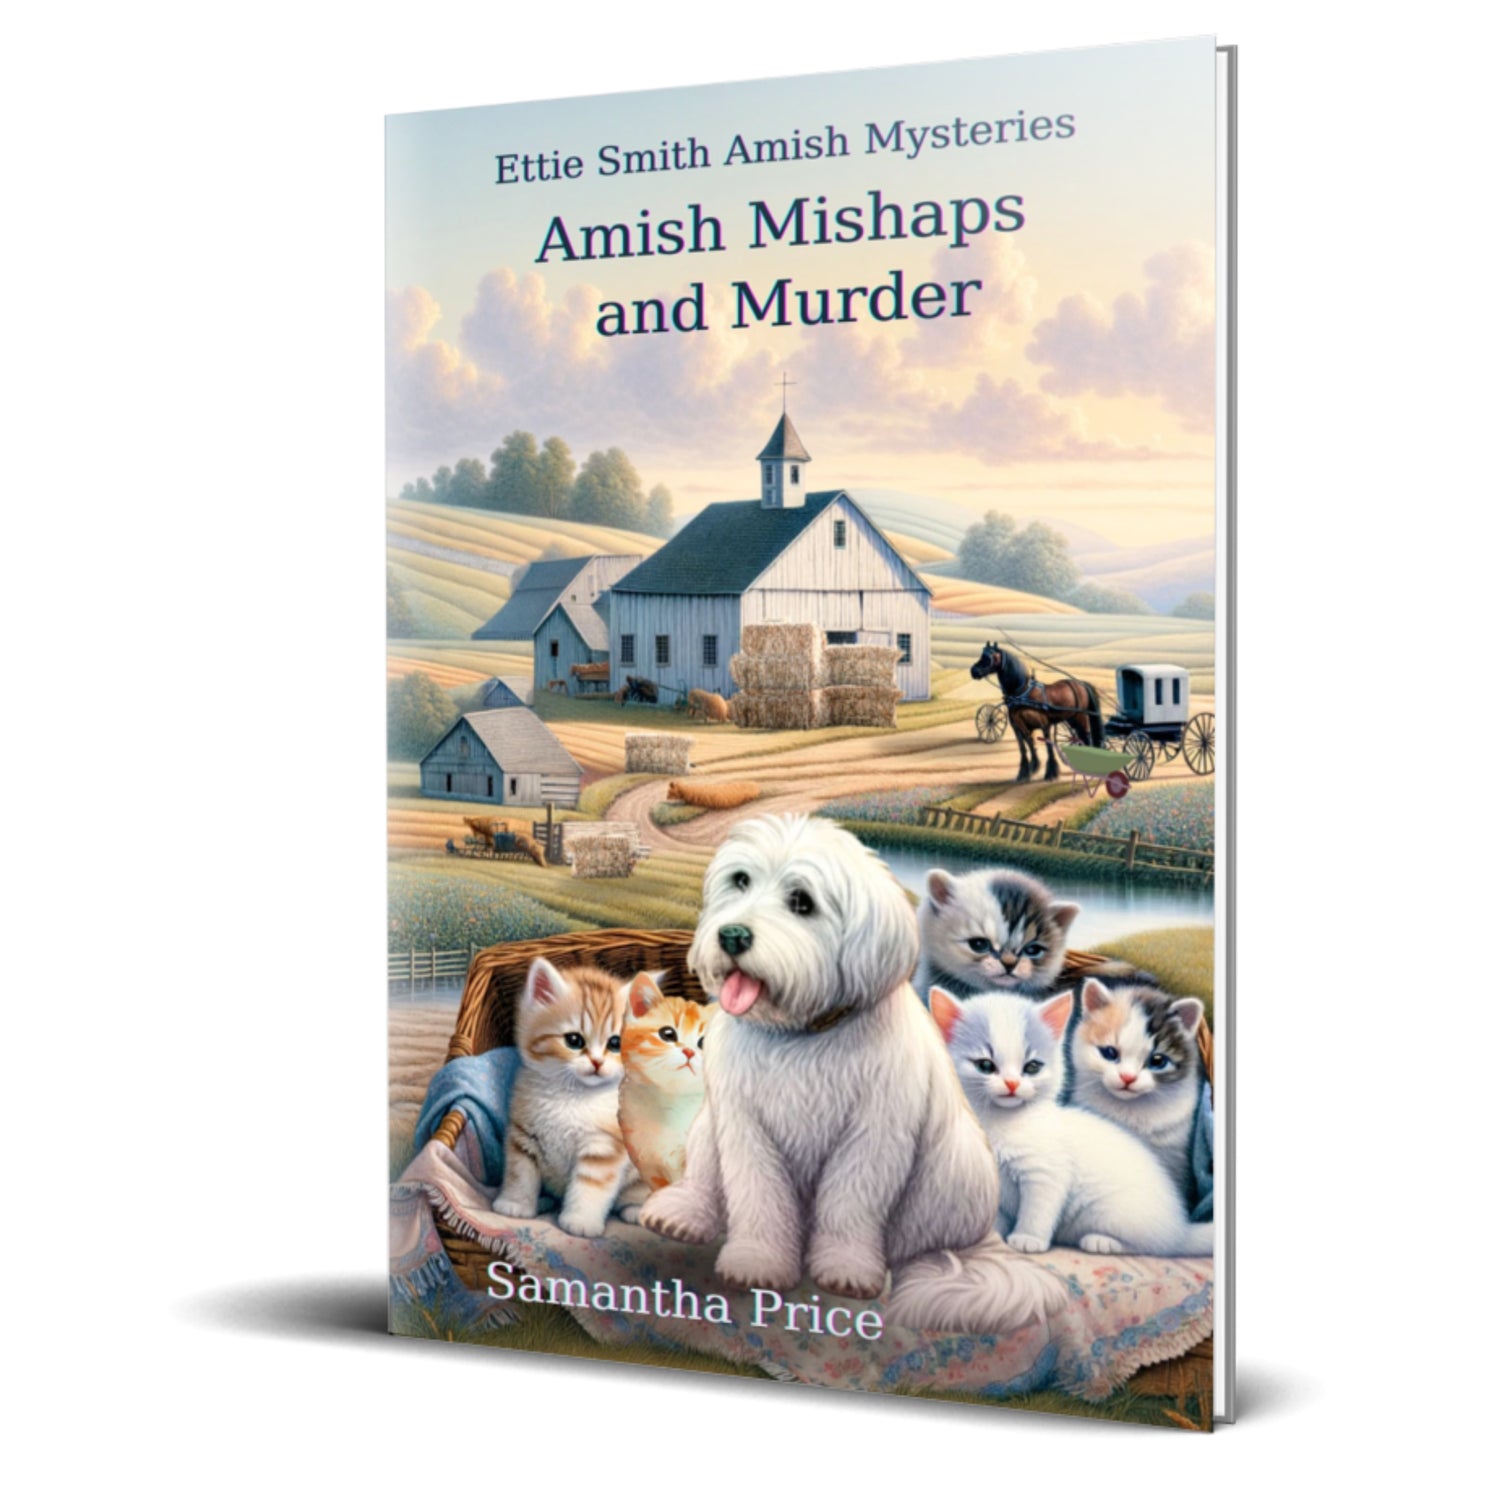 Amish Mishaps and Murder (PAPERBACK)